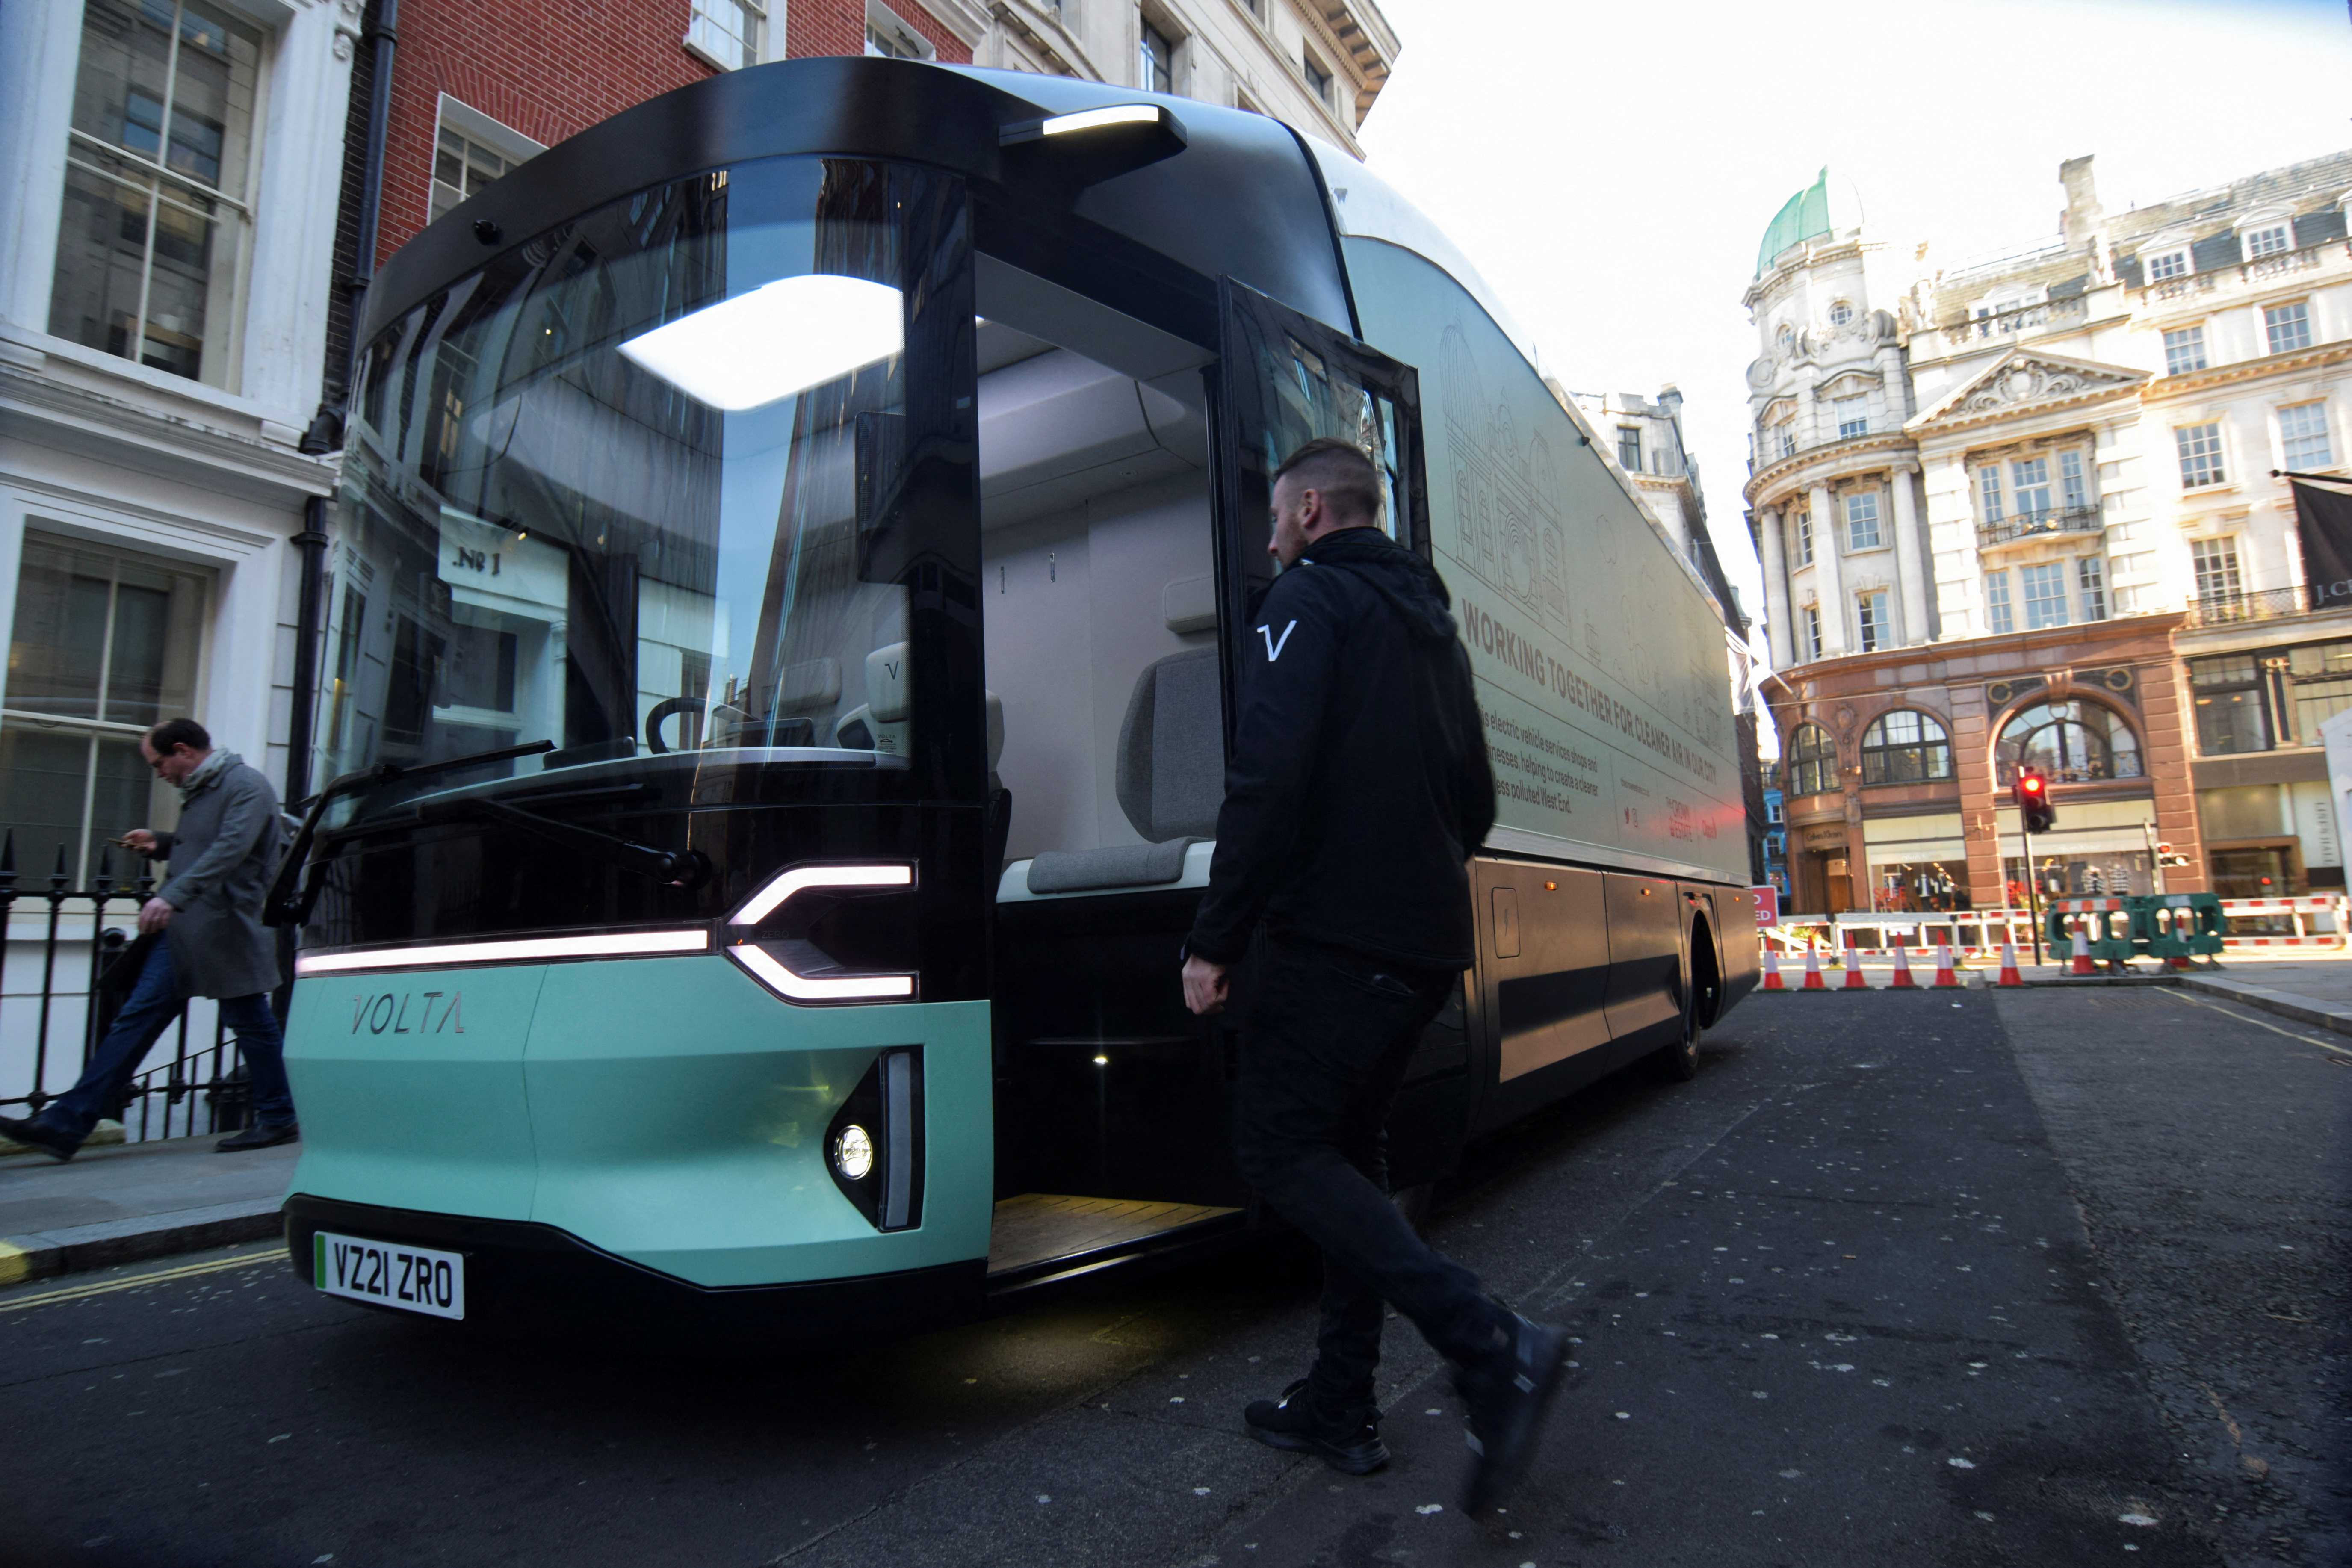 A prototype of the Volta Zero, a 16-tonne electric truck that Volta Trucks will start mass producing in late 2022, is displayed in central London, Britain, January 13, 2022.  REUTERS/Nick Carey